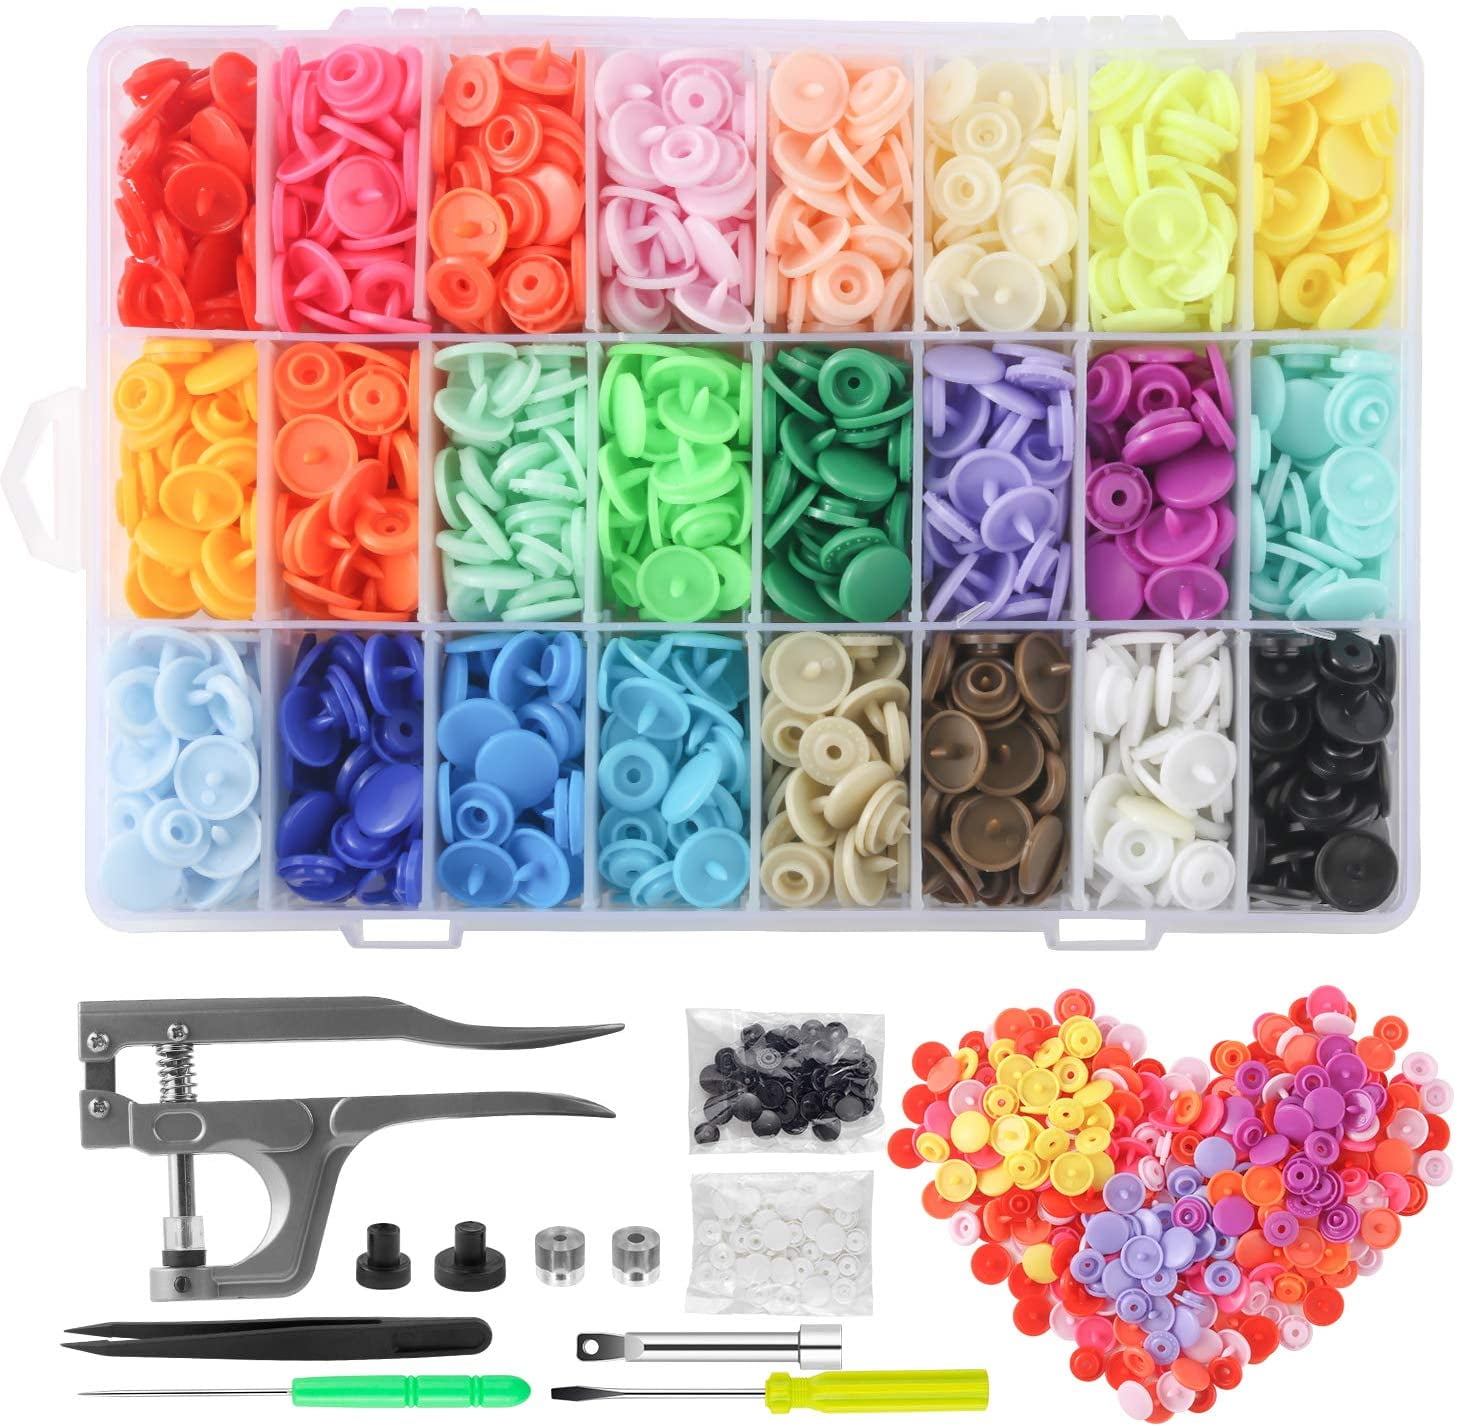 Tzgsonp 200PCS Metal Snap Fasteners Kit Clothing Snaps, 9.5mm Button Snaps  with Snaps Pliers Set for Sewing, Clothing, Crafting, Jackets, Jeans Wears